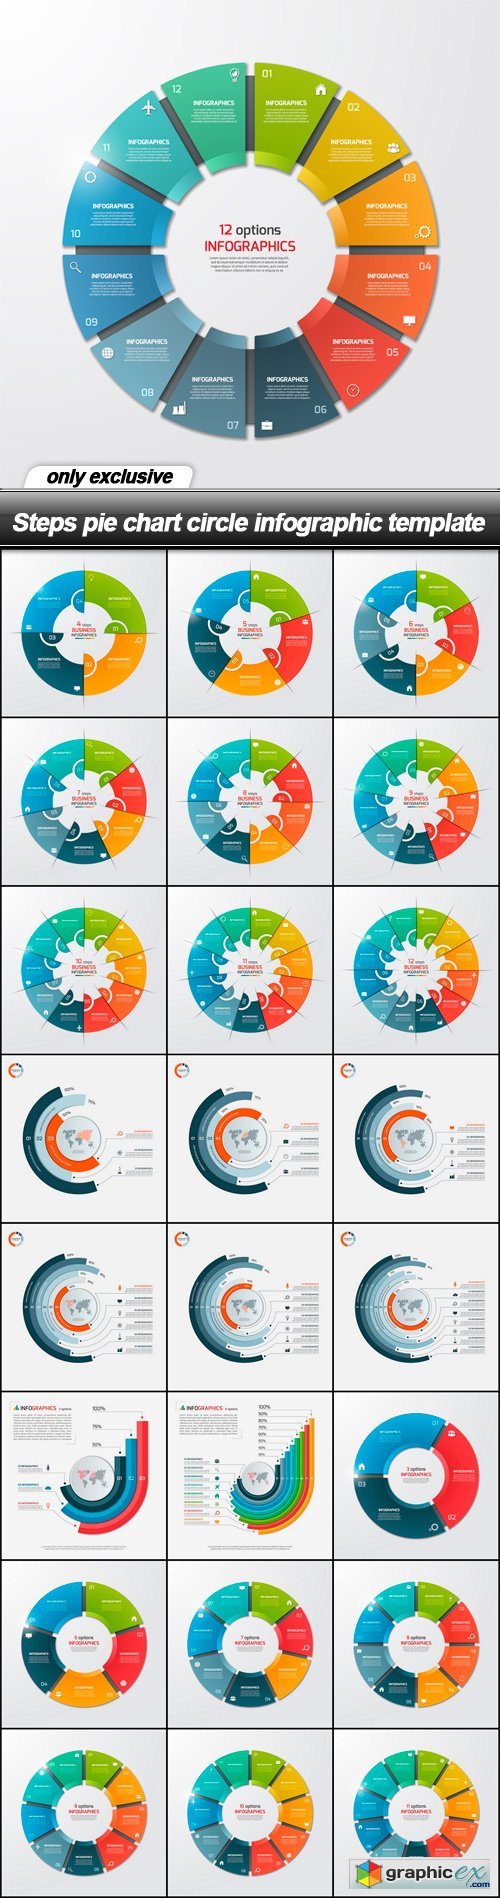 Steps pie chart circle infographic template - 25 EPS